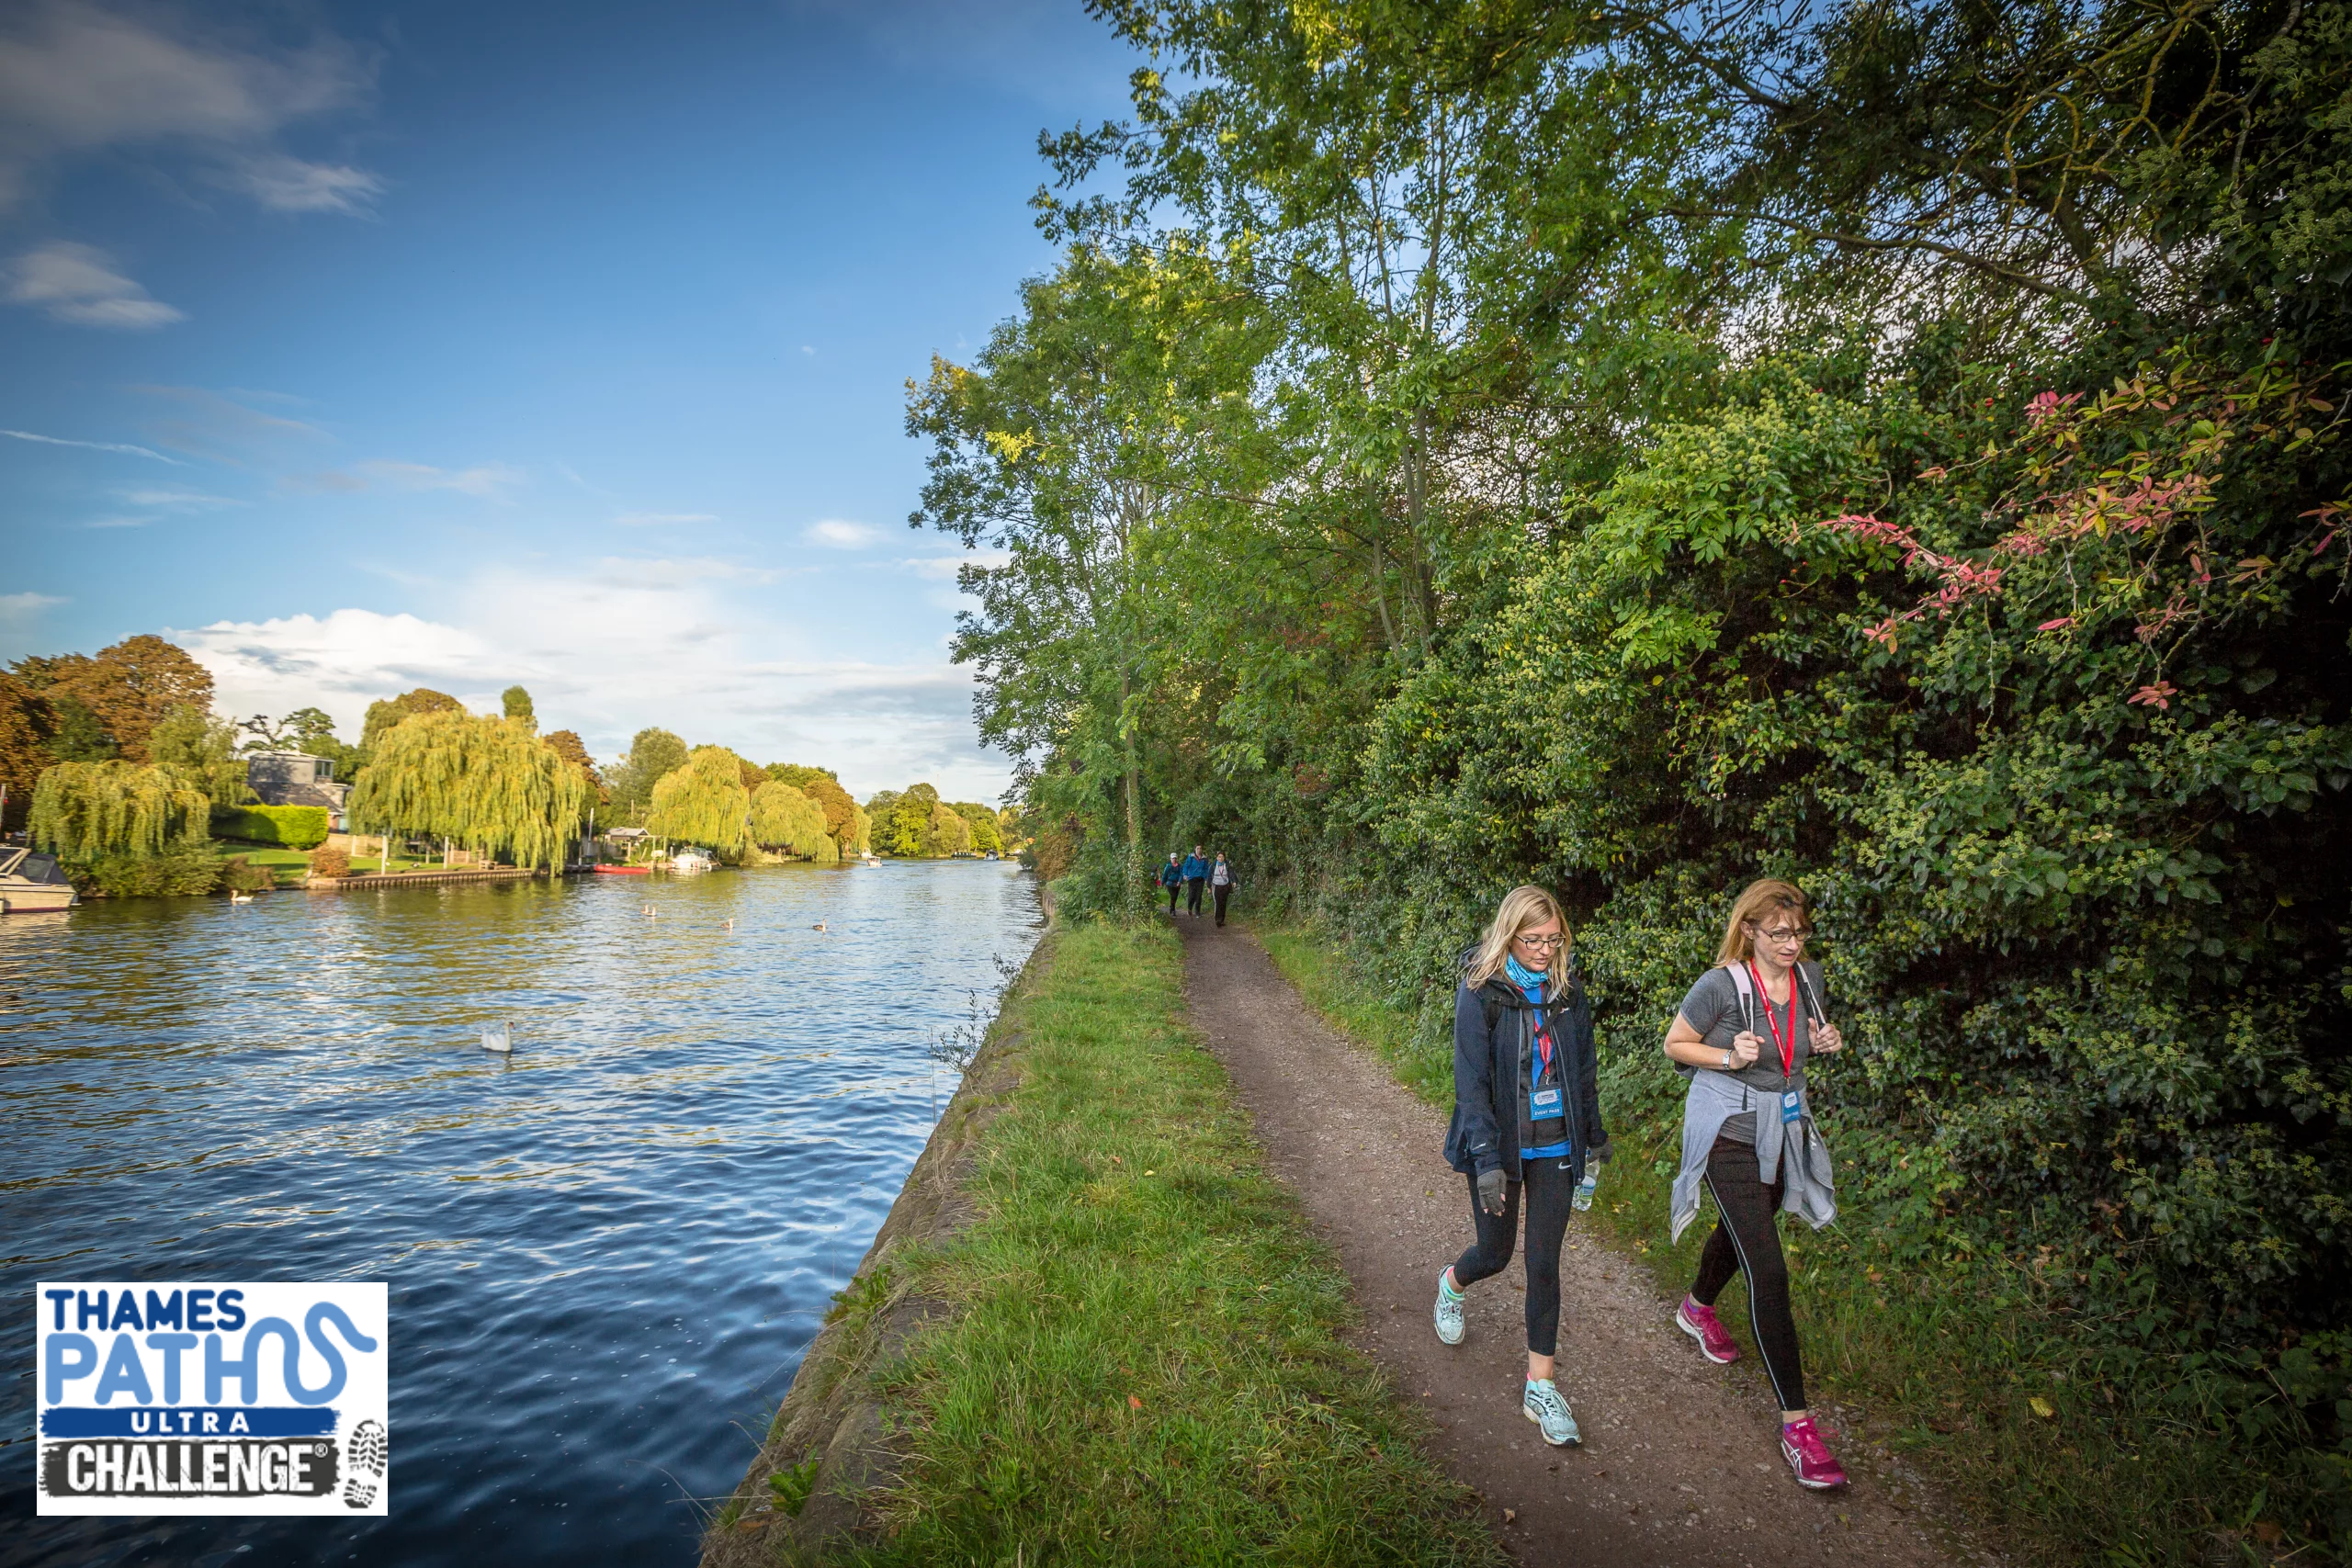 Two people taking on the Thames Path Challenge, walking along a towpath in the countryside.